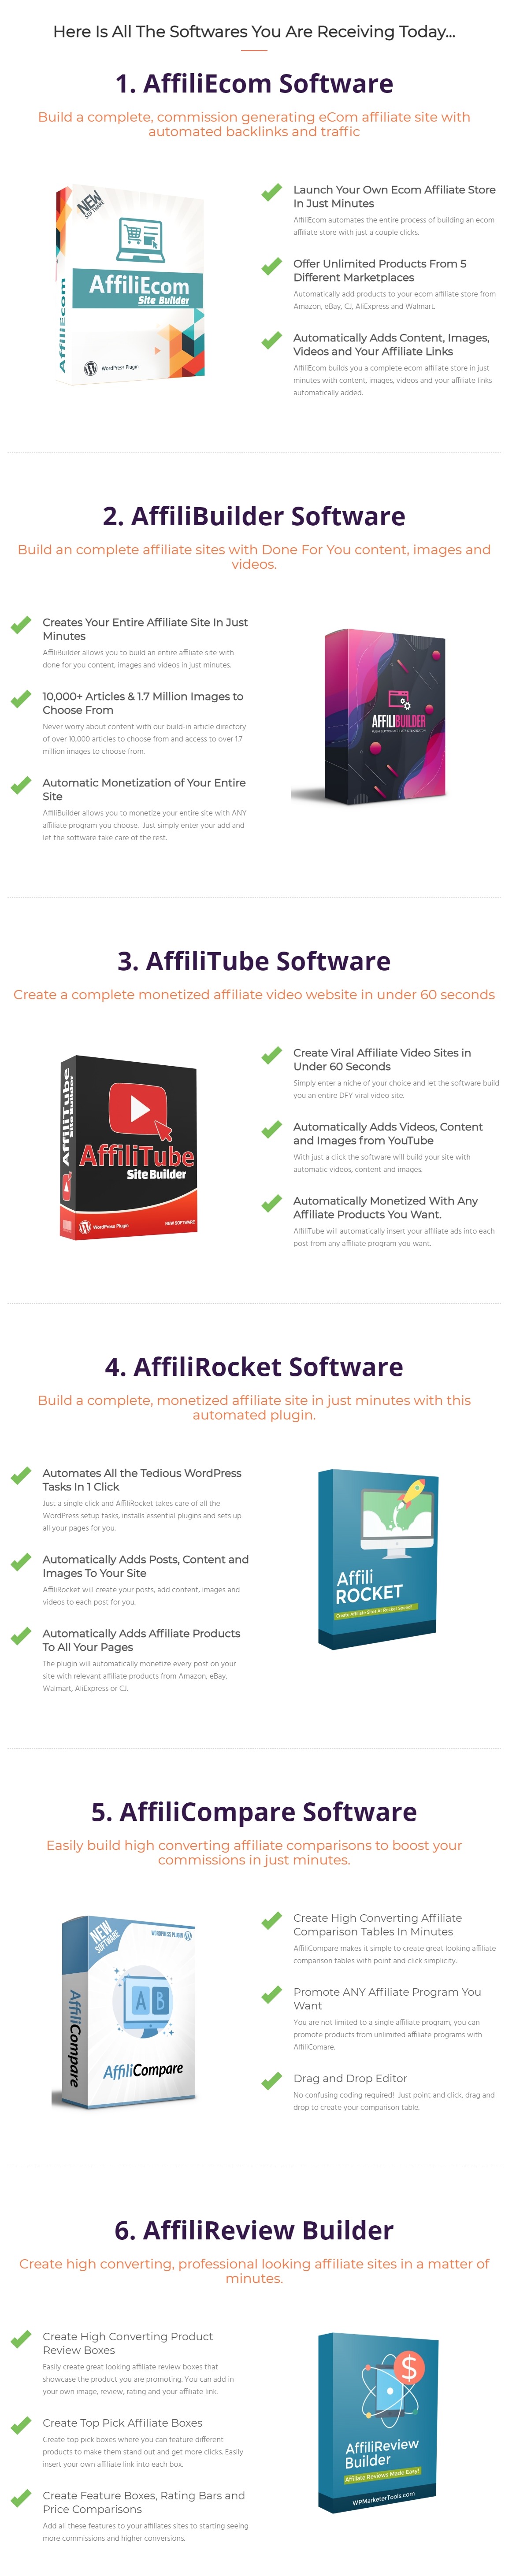 screenshot 2020.12.27 04 36 35 Grab Our Entire Affili-Suite of Products At A Massive 85% Discount